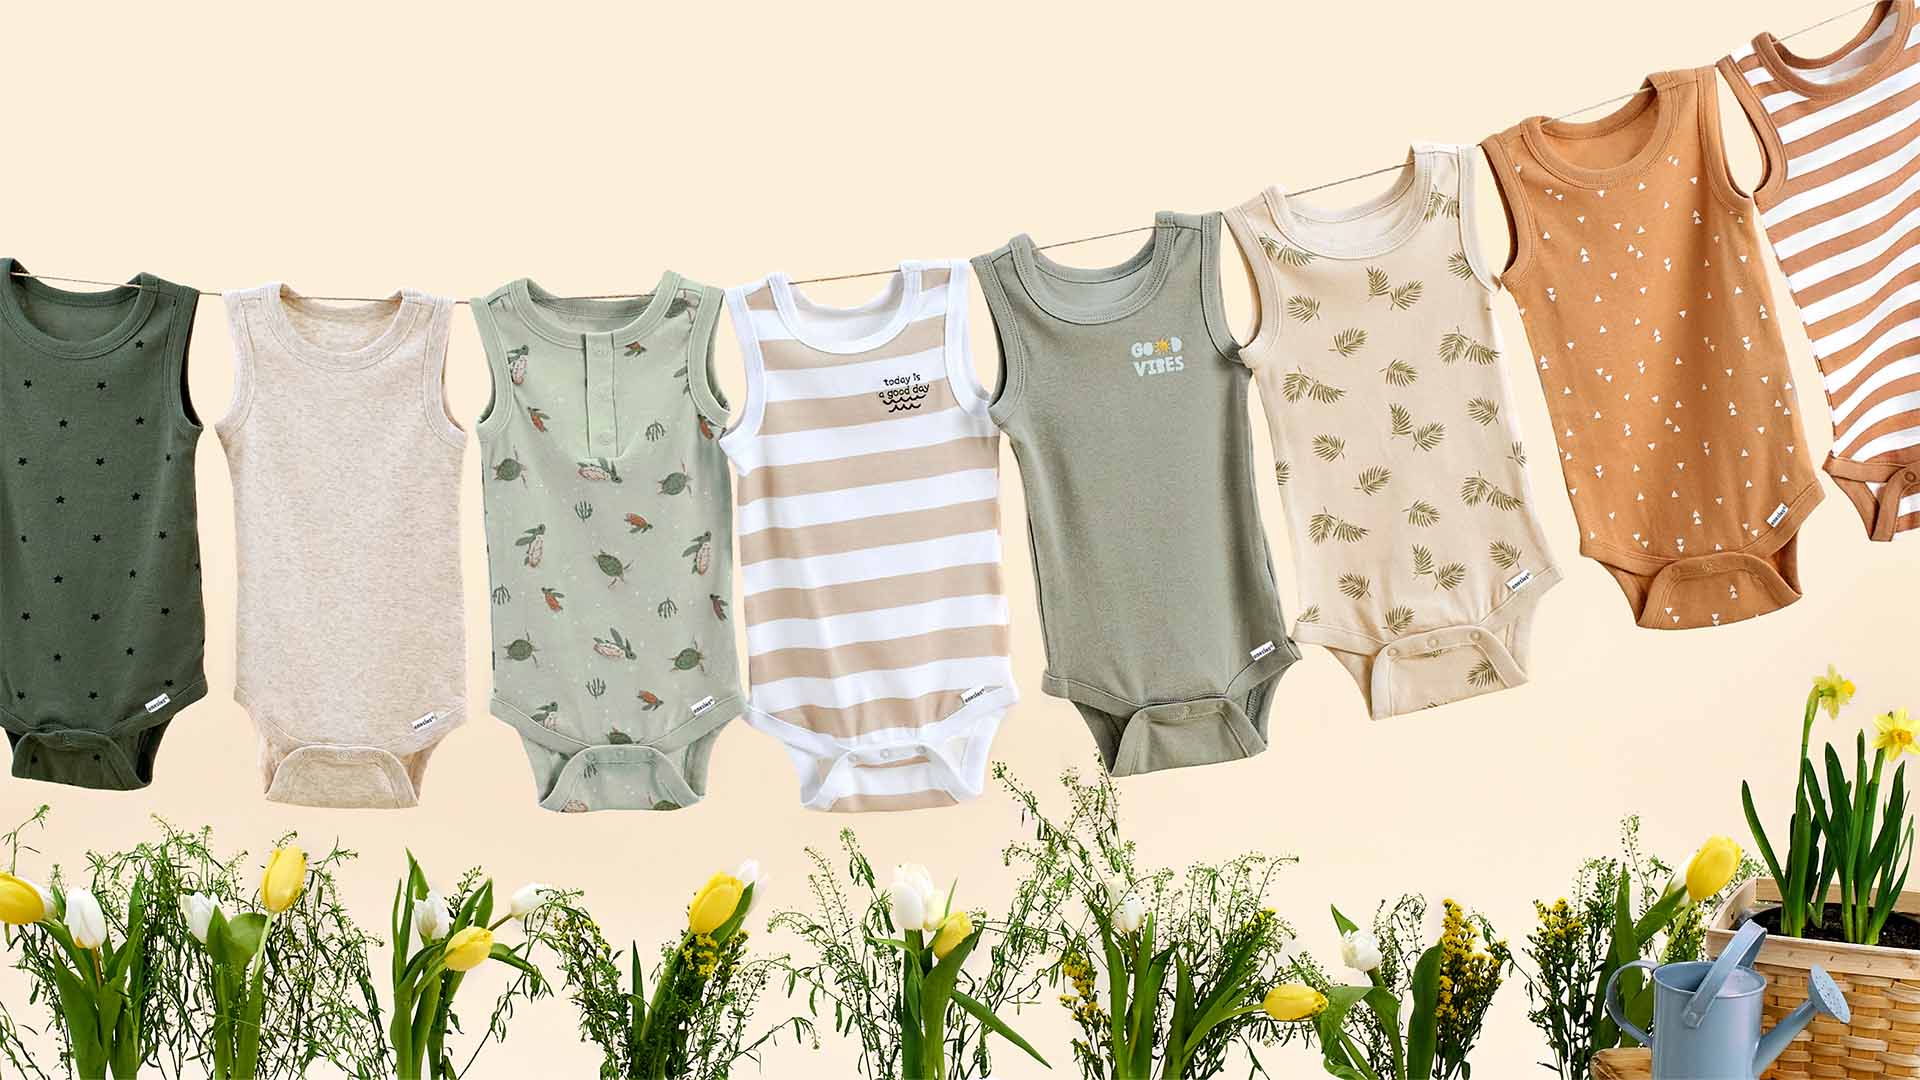 Carter's Baby Boys' Clothing